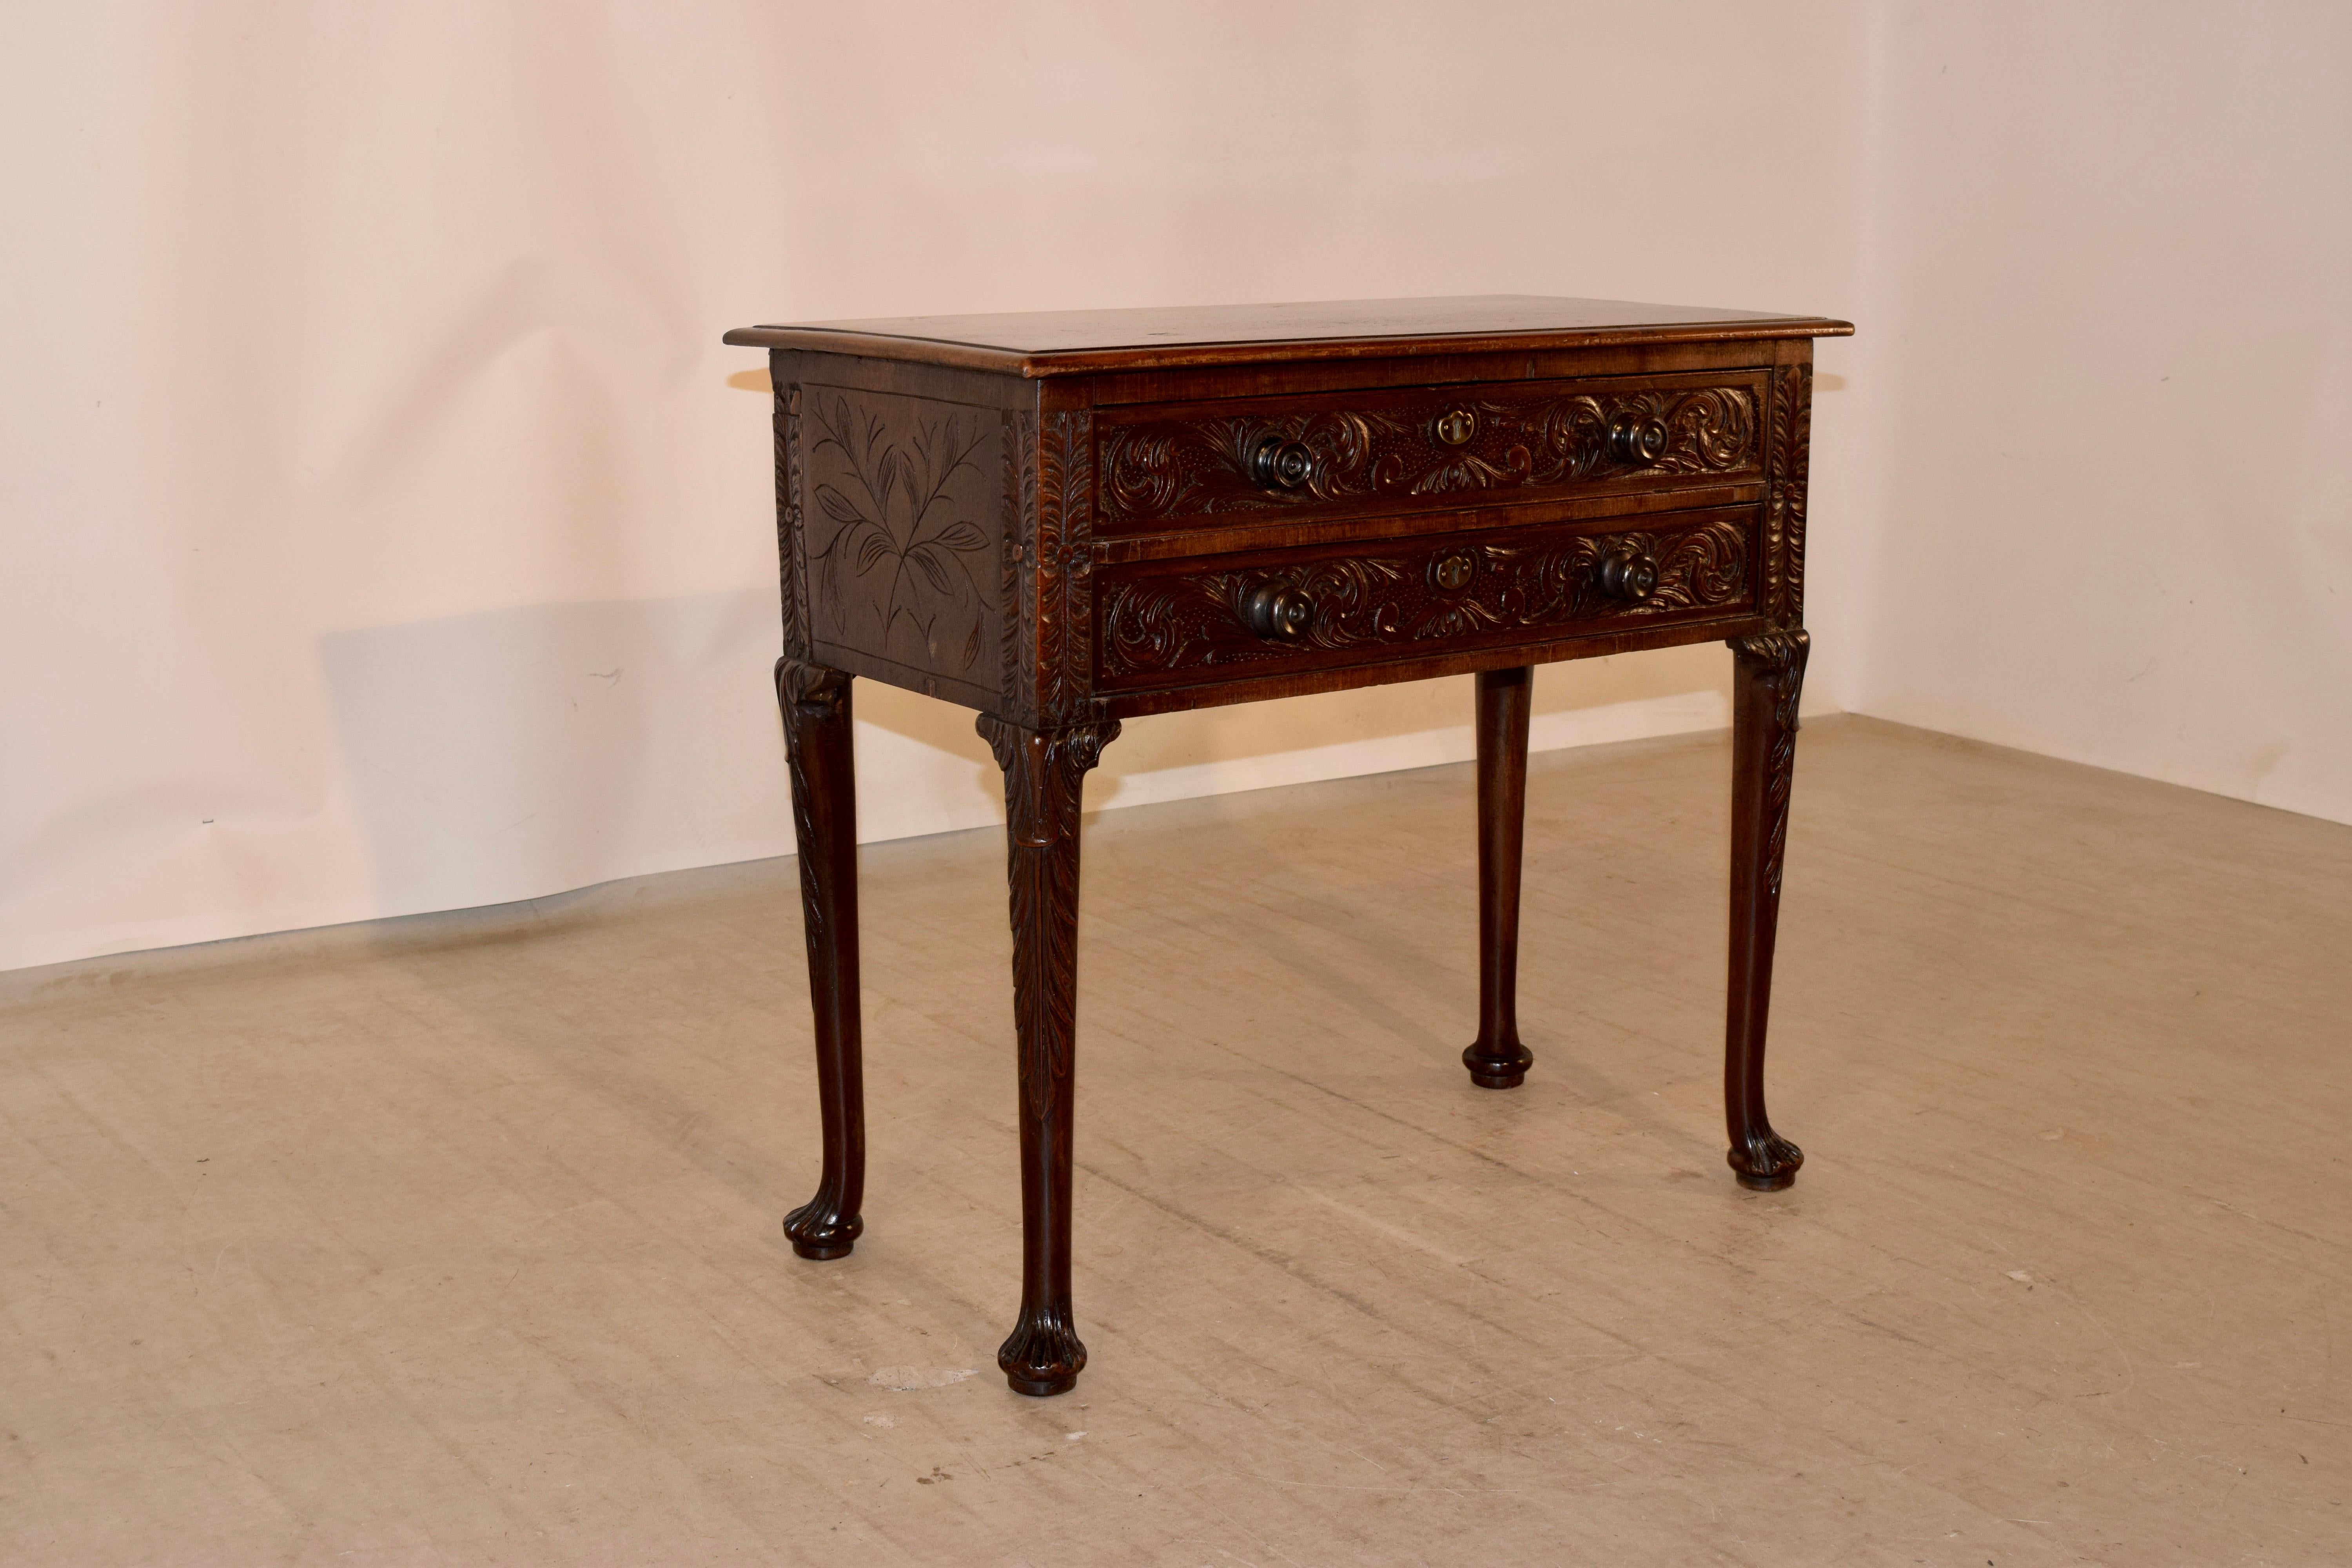 Early 19th century mahogany side table from England with a wonderfully grained top with beveled edges, following down to hand carved sides and two drawers in the front. The entire case is expertly hand carved decorated, and the table is supported on